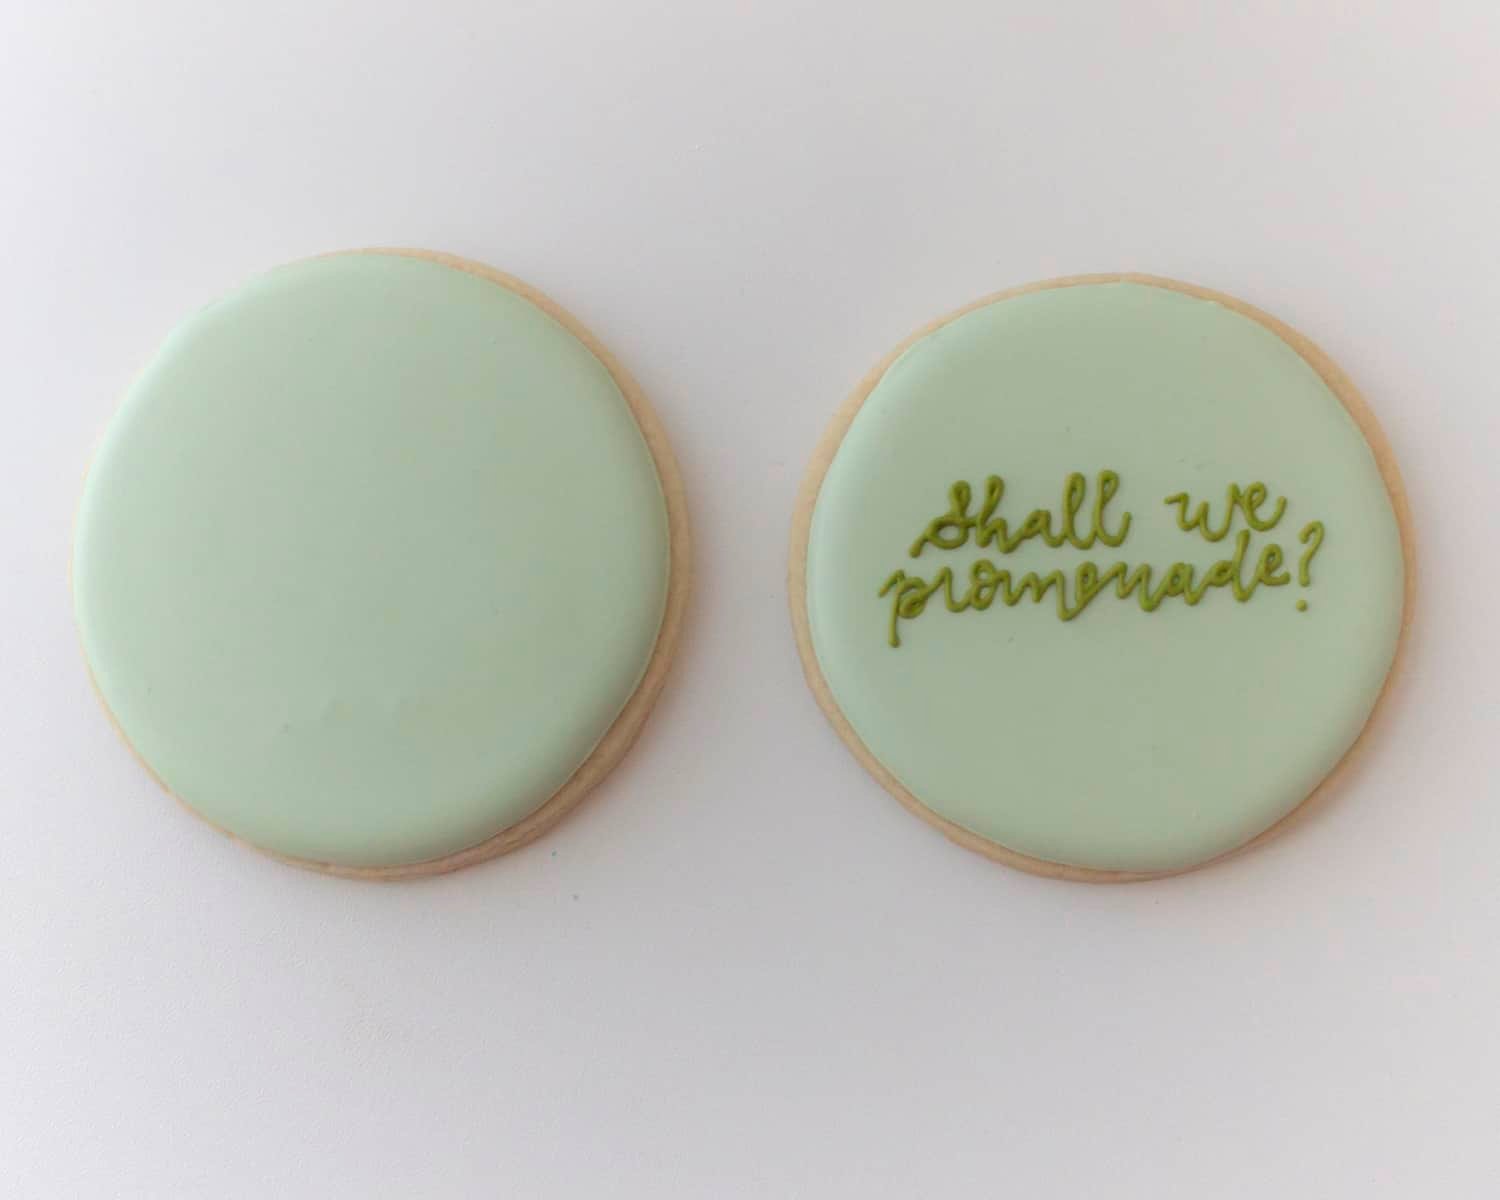 Freeze cookies with text "Shall we go for a walk?"